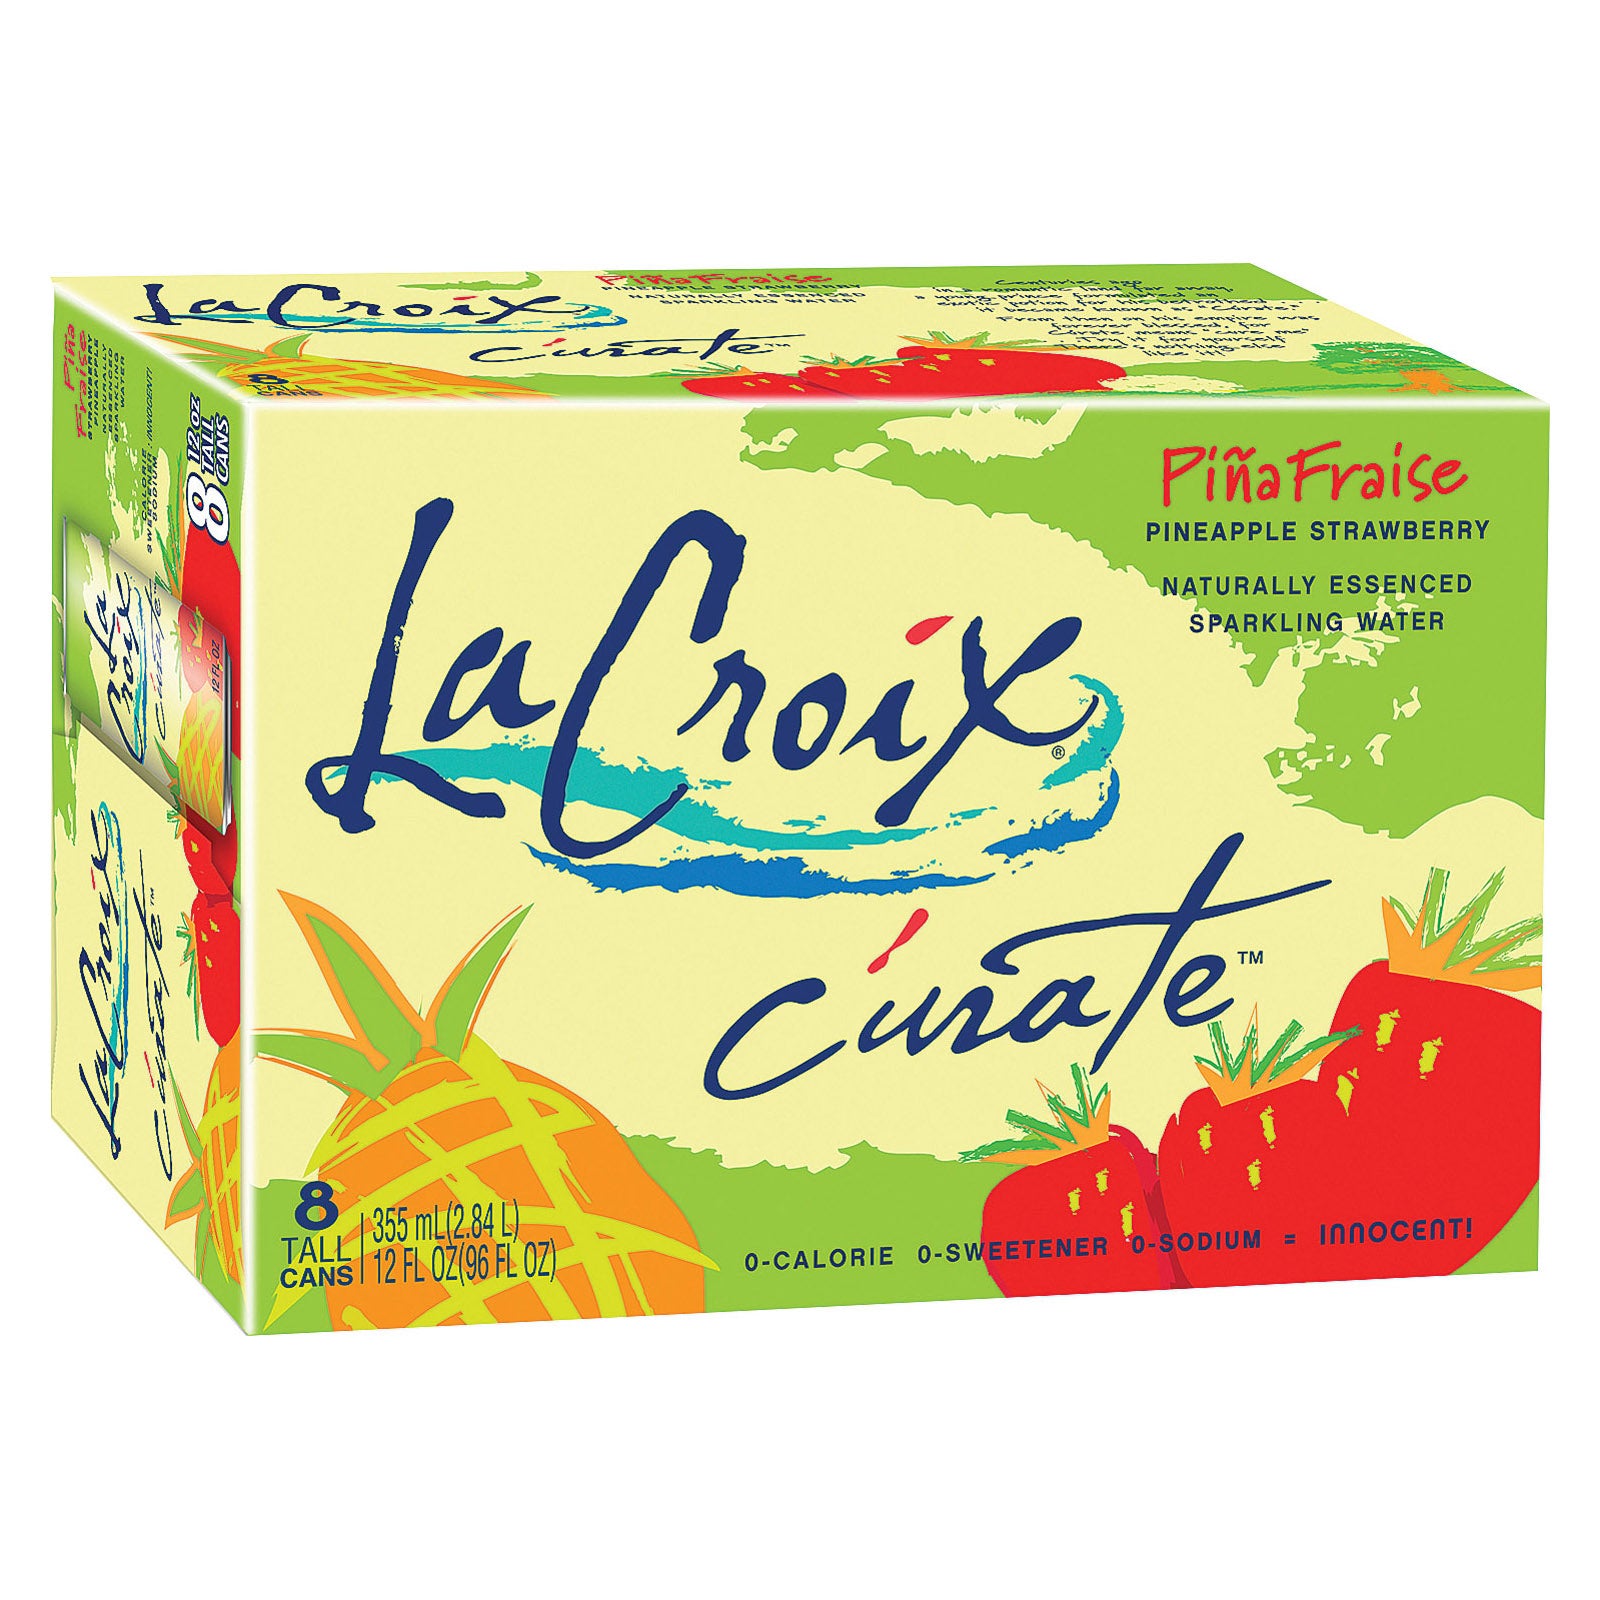 Lacroix Sparkling Water - Pina Fraise - Case Of 3 - 12 Fl Oz. - Whole Green Foods